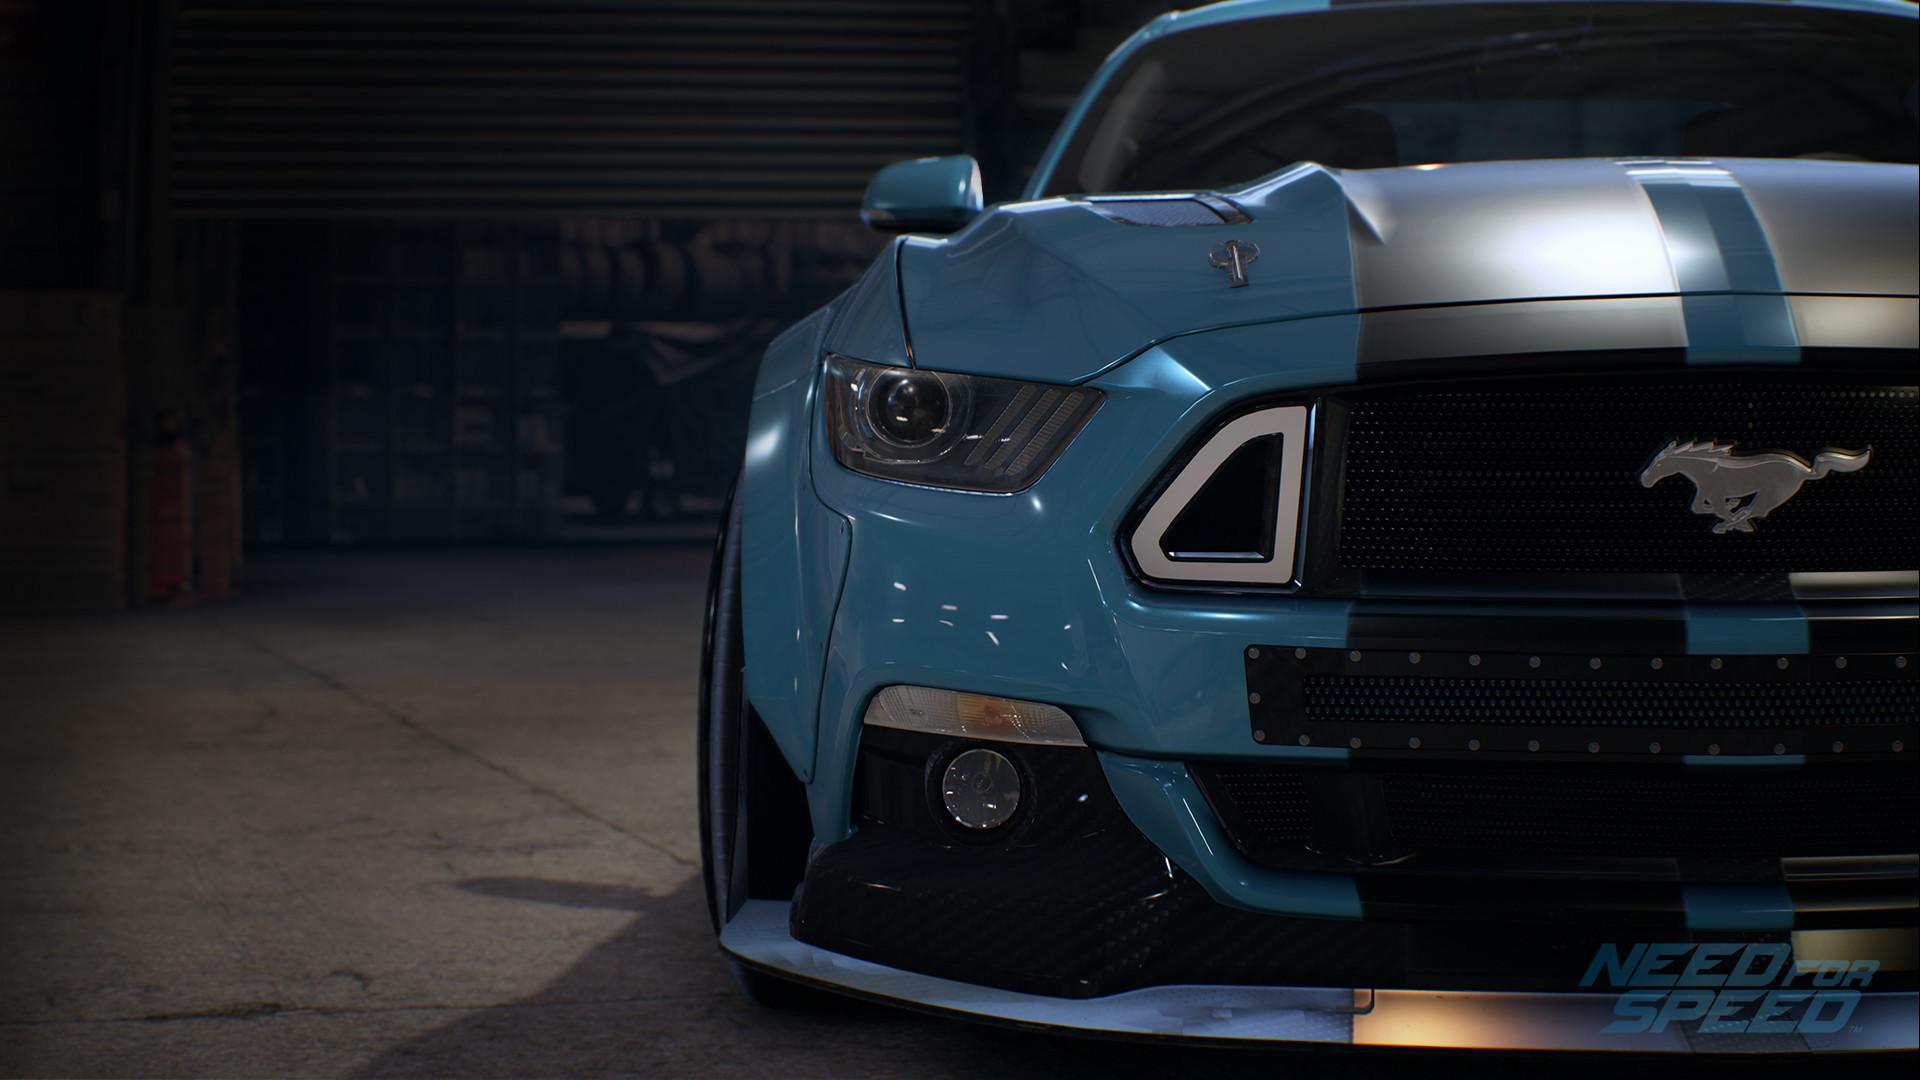 Wallpaper De Need For Speed Payback 1920x1080